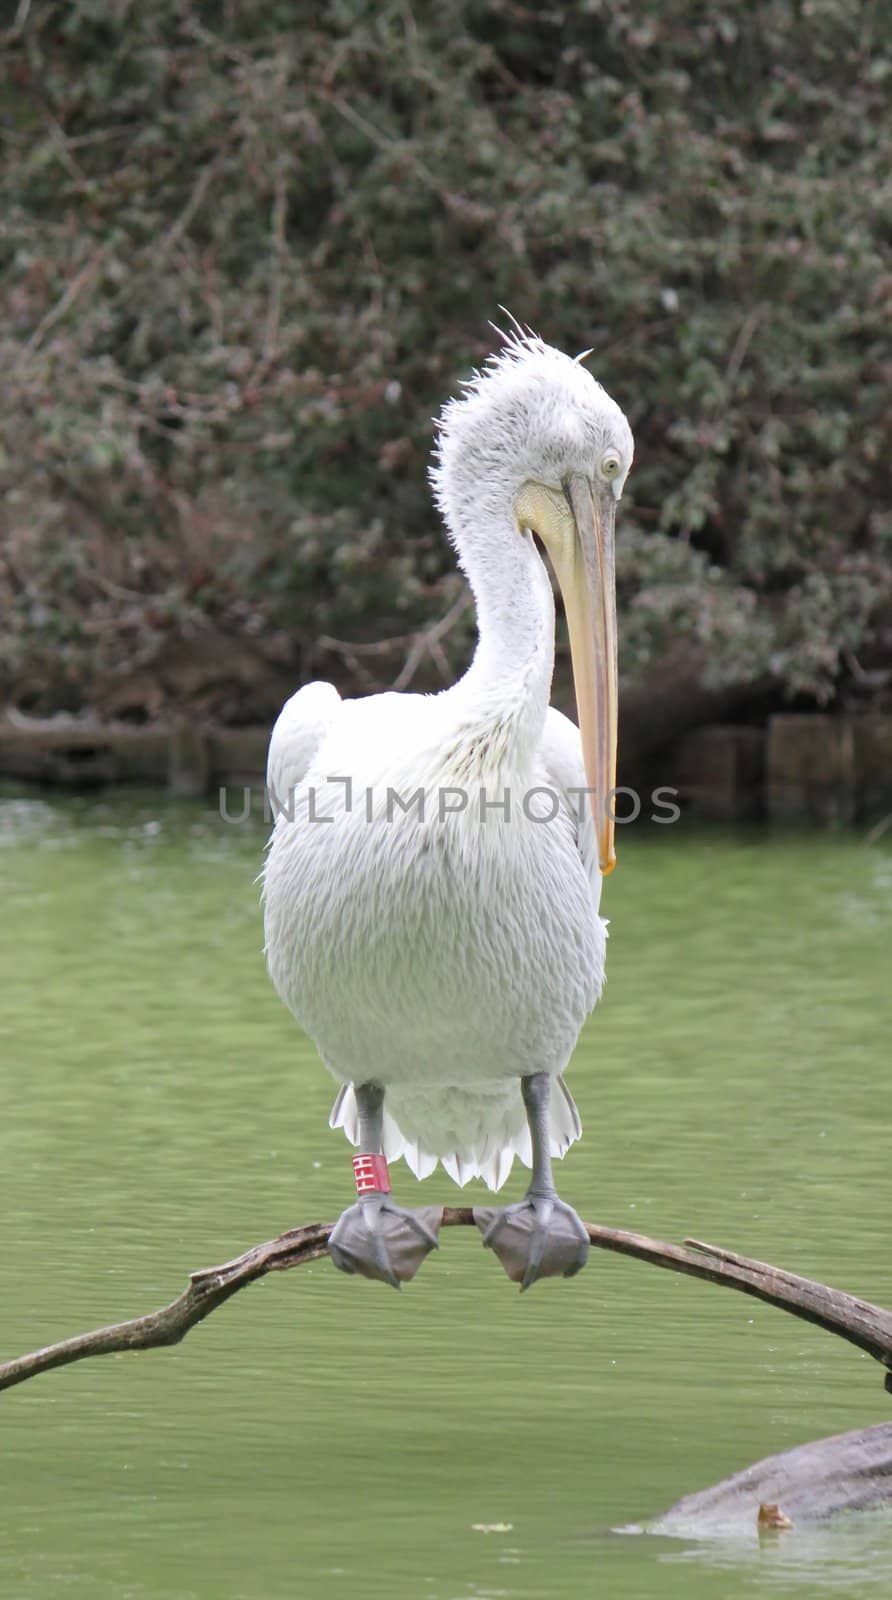 Pelican standing on a branch by Elenaphotos21